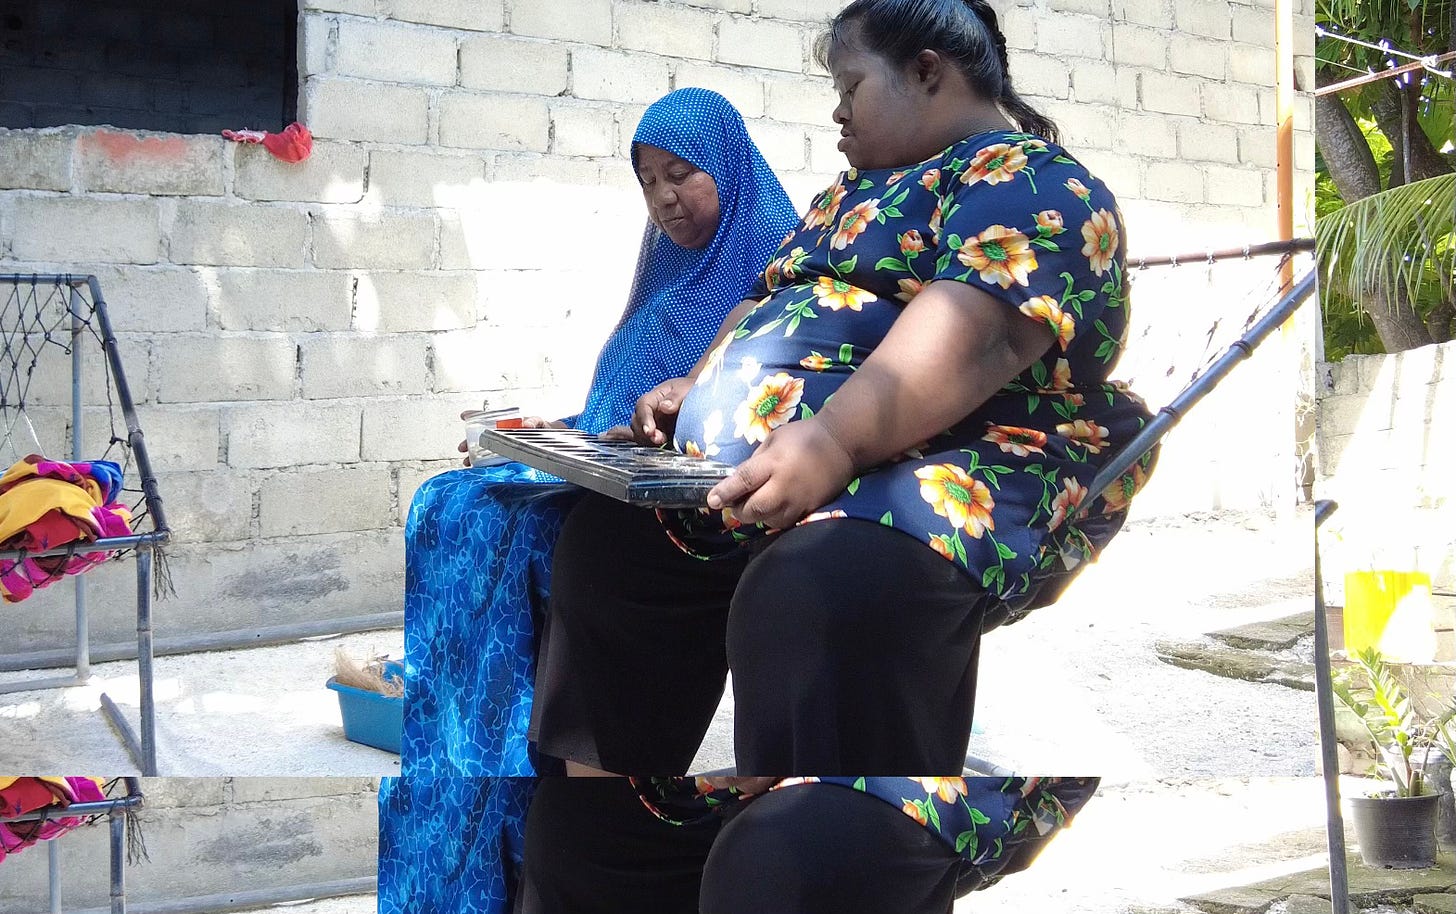 A woman wearing a blue hijab sits next to another woman, wearing a black, floral print shirt